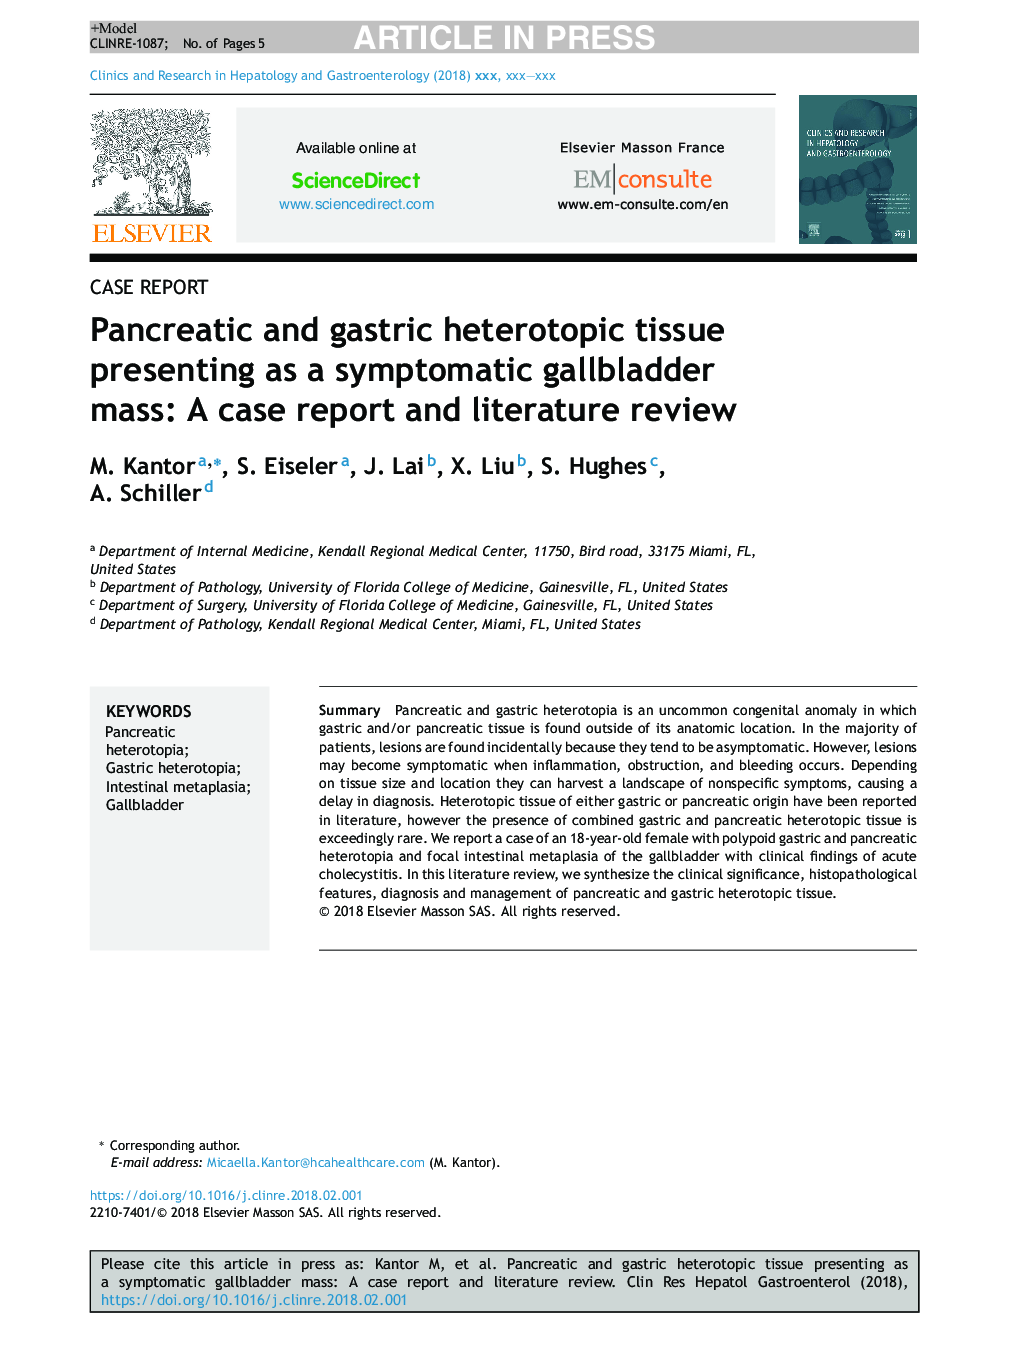 Pancreatic and gastric heterotopic tissue presenting as a symptomatic gallbladder mass: A case report and literature review